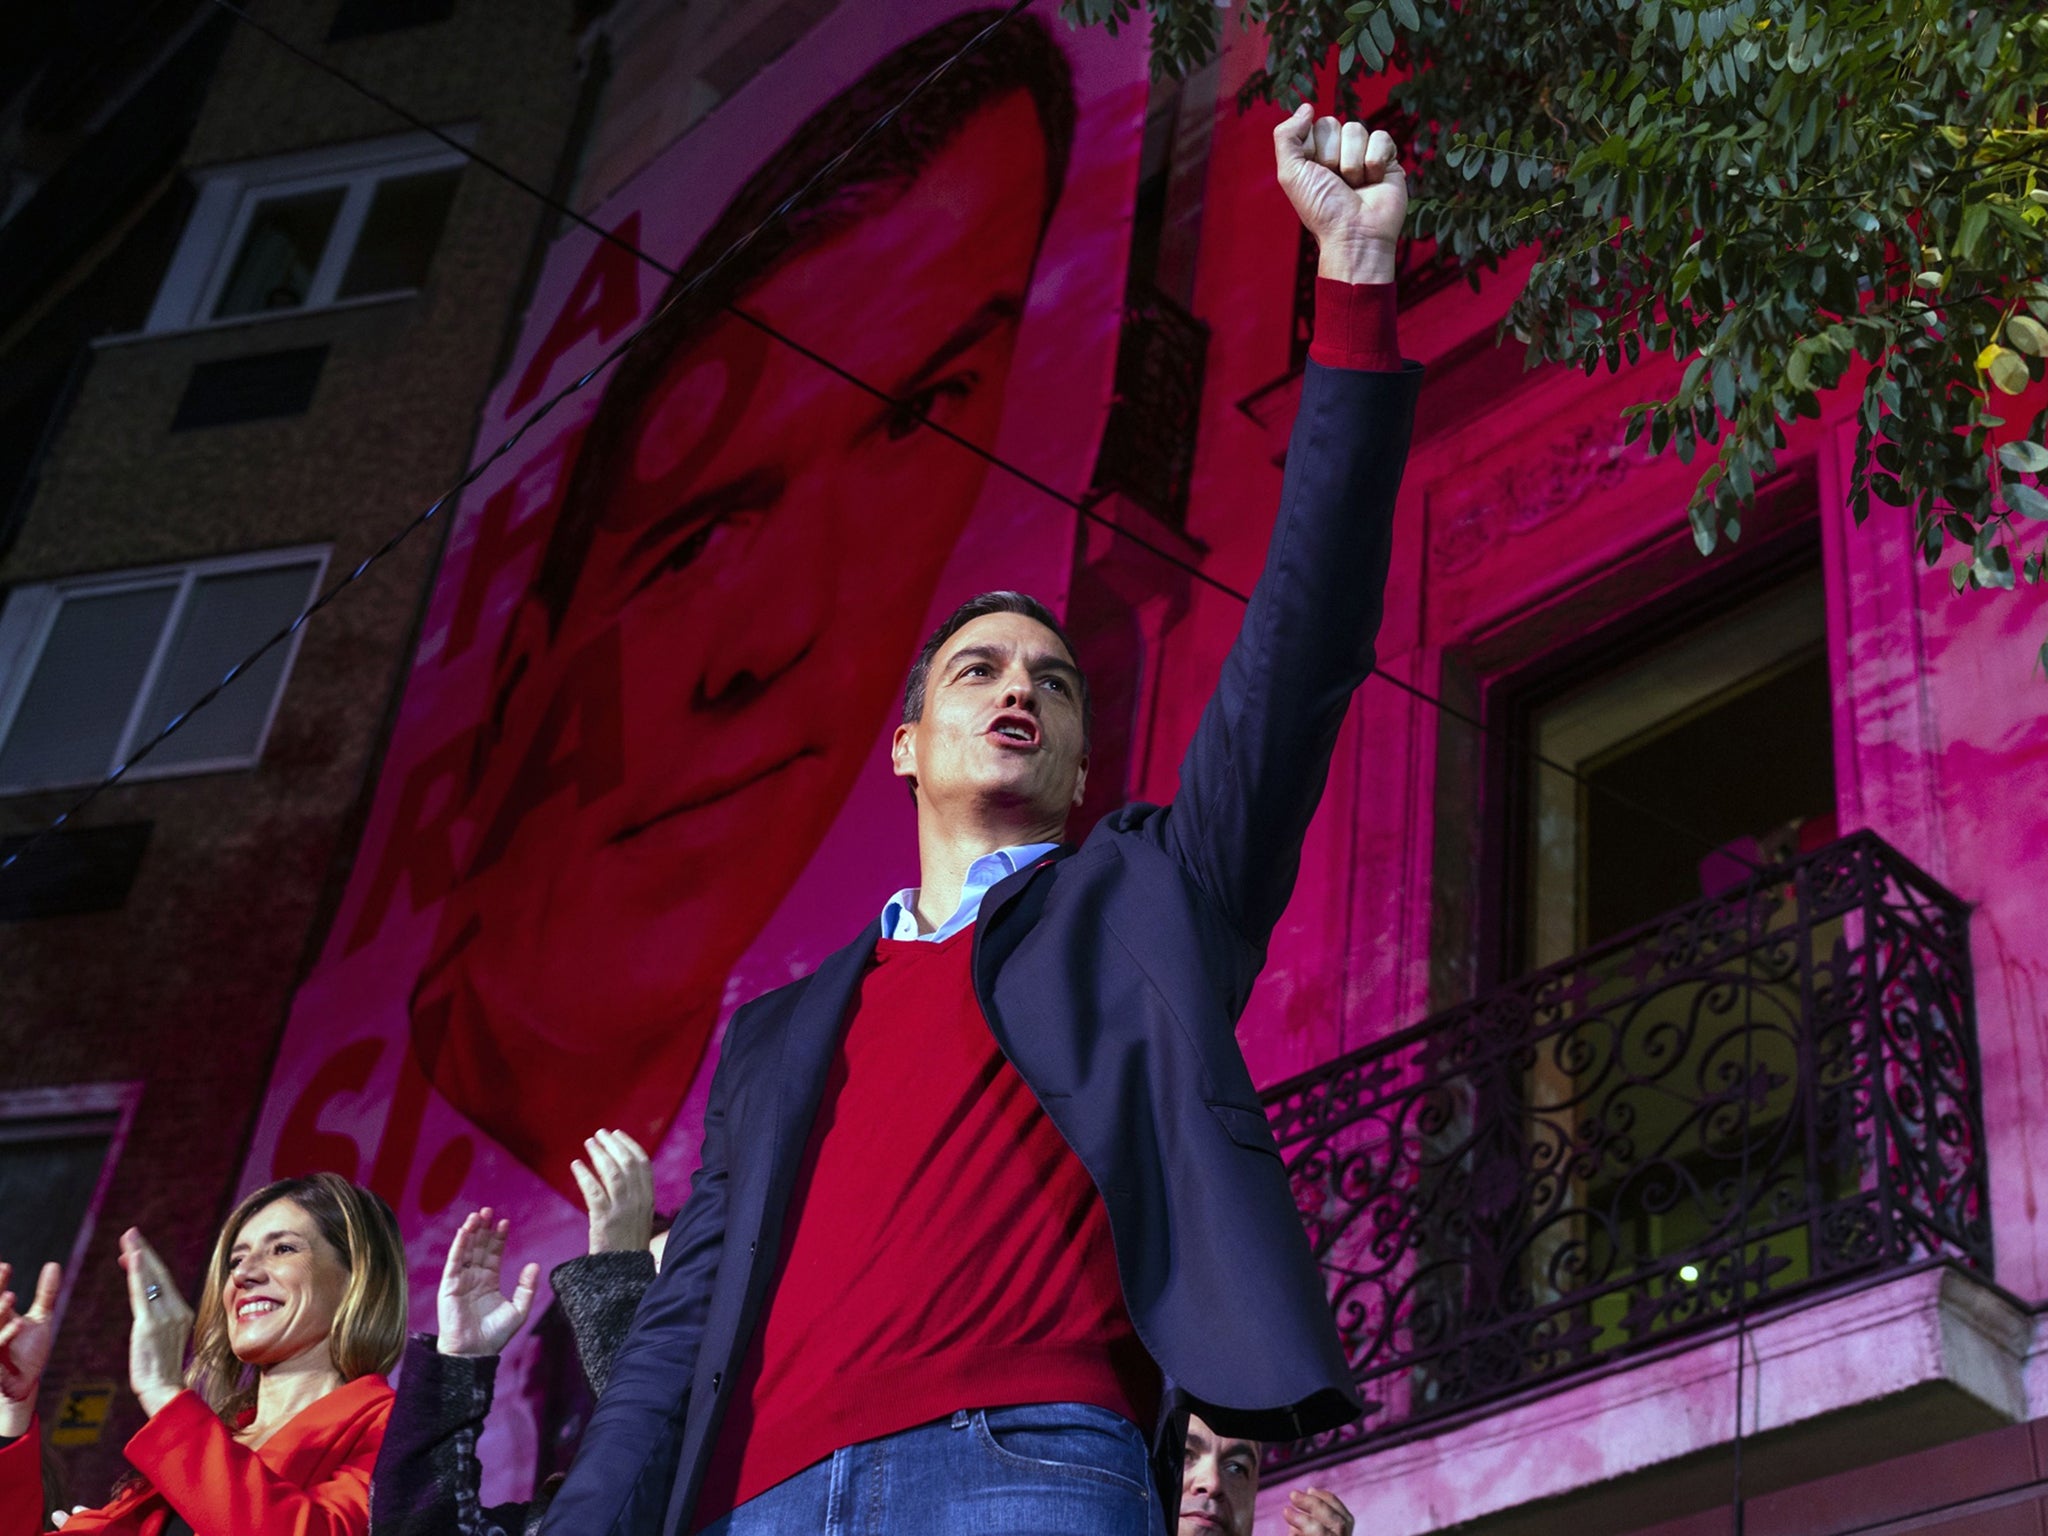 Pedro Sanchez waves to supporters while celebrating at the Socialist party headquarters in Madrid